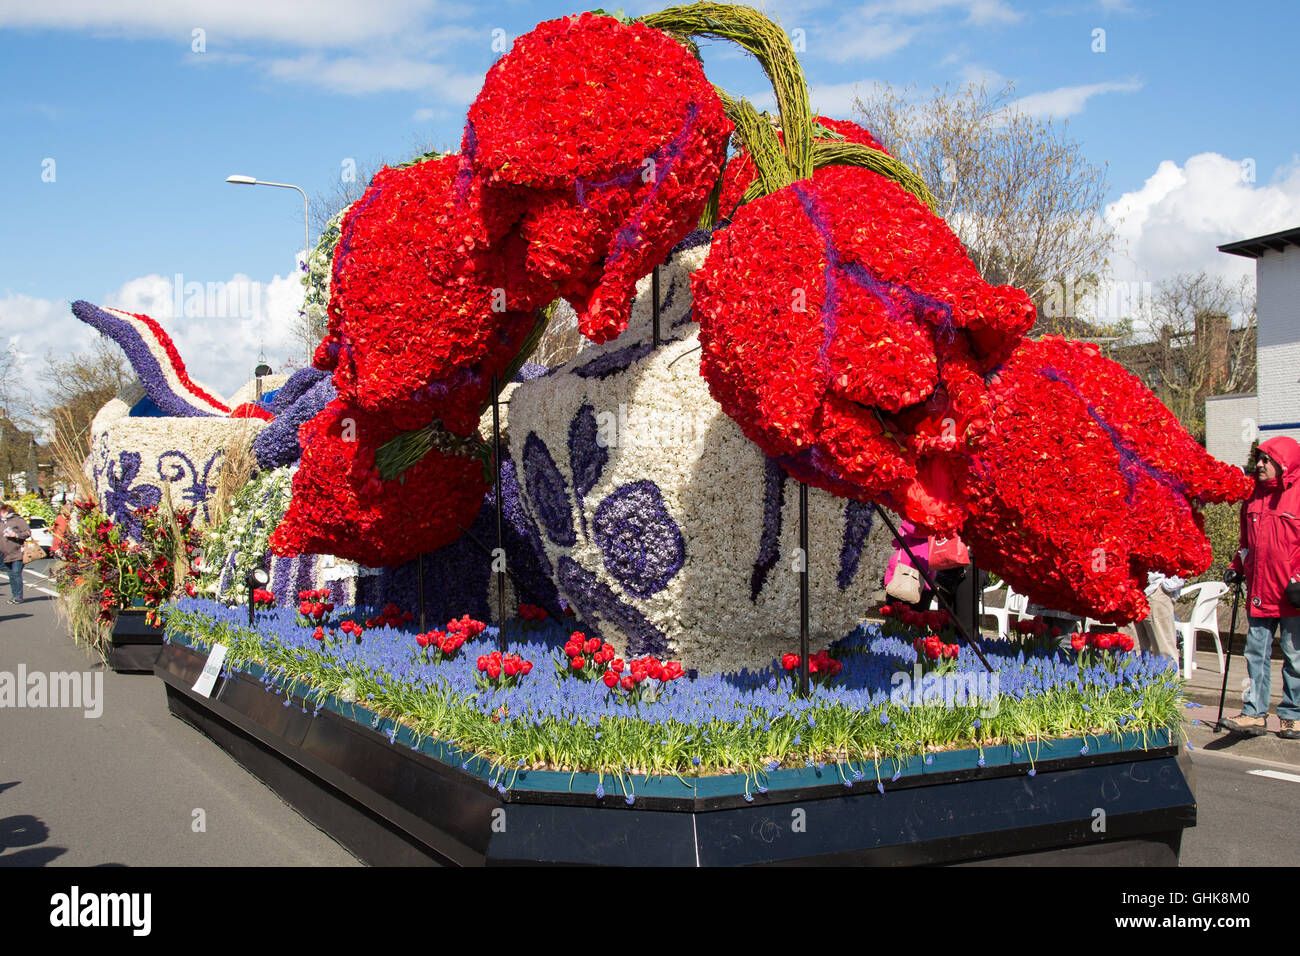 Platform in the form of an old vase with red tulips follows the route of the traditional flower parade in the Stock Photo